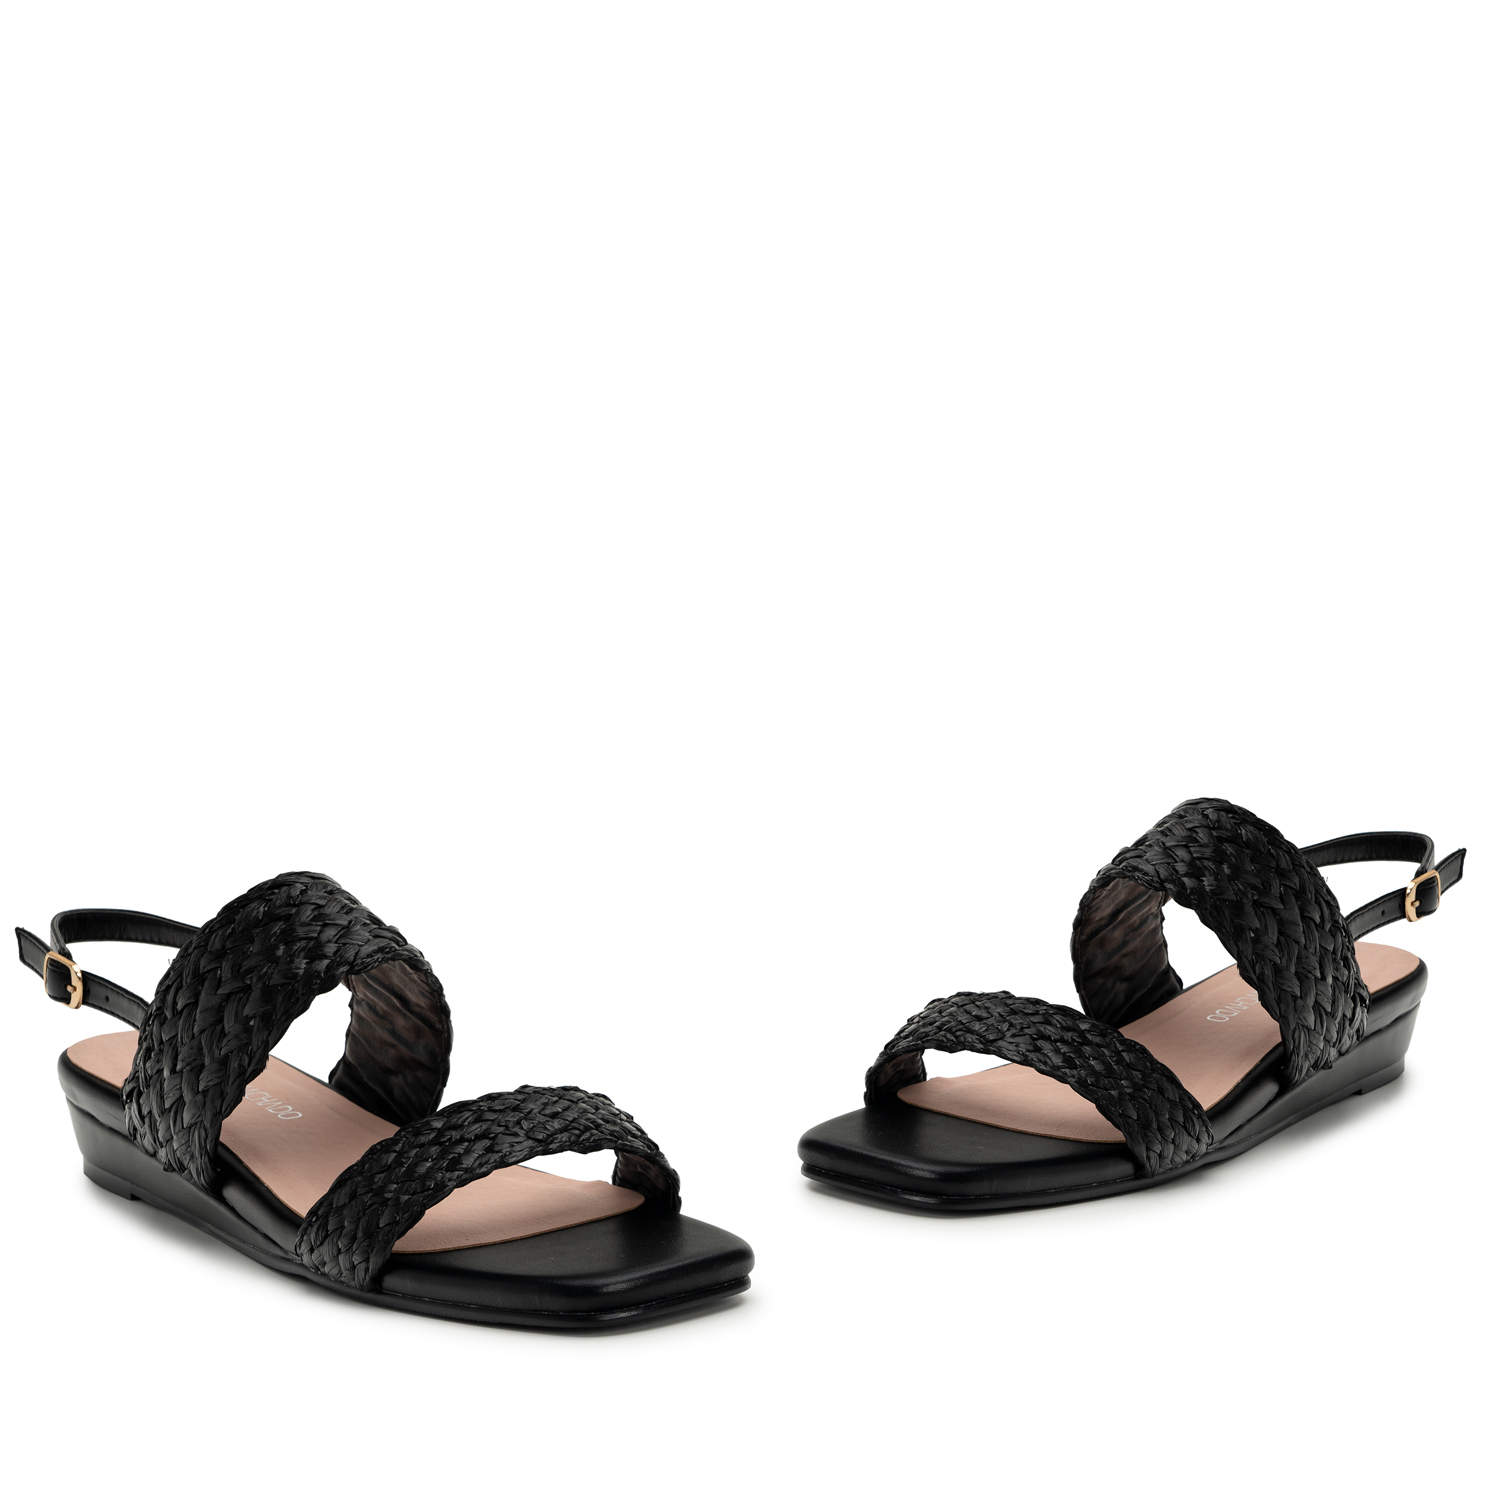 Black Faux Leather Braided Sandals 